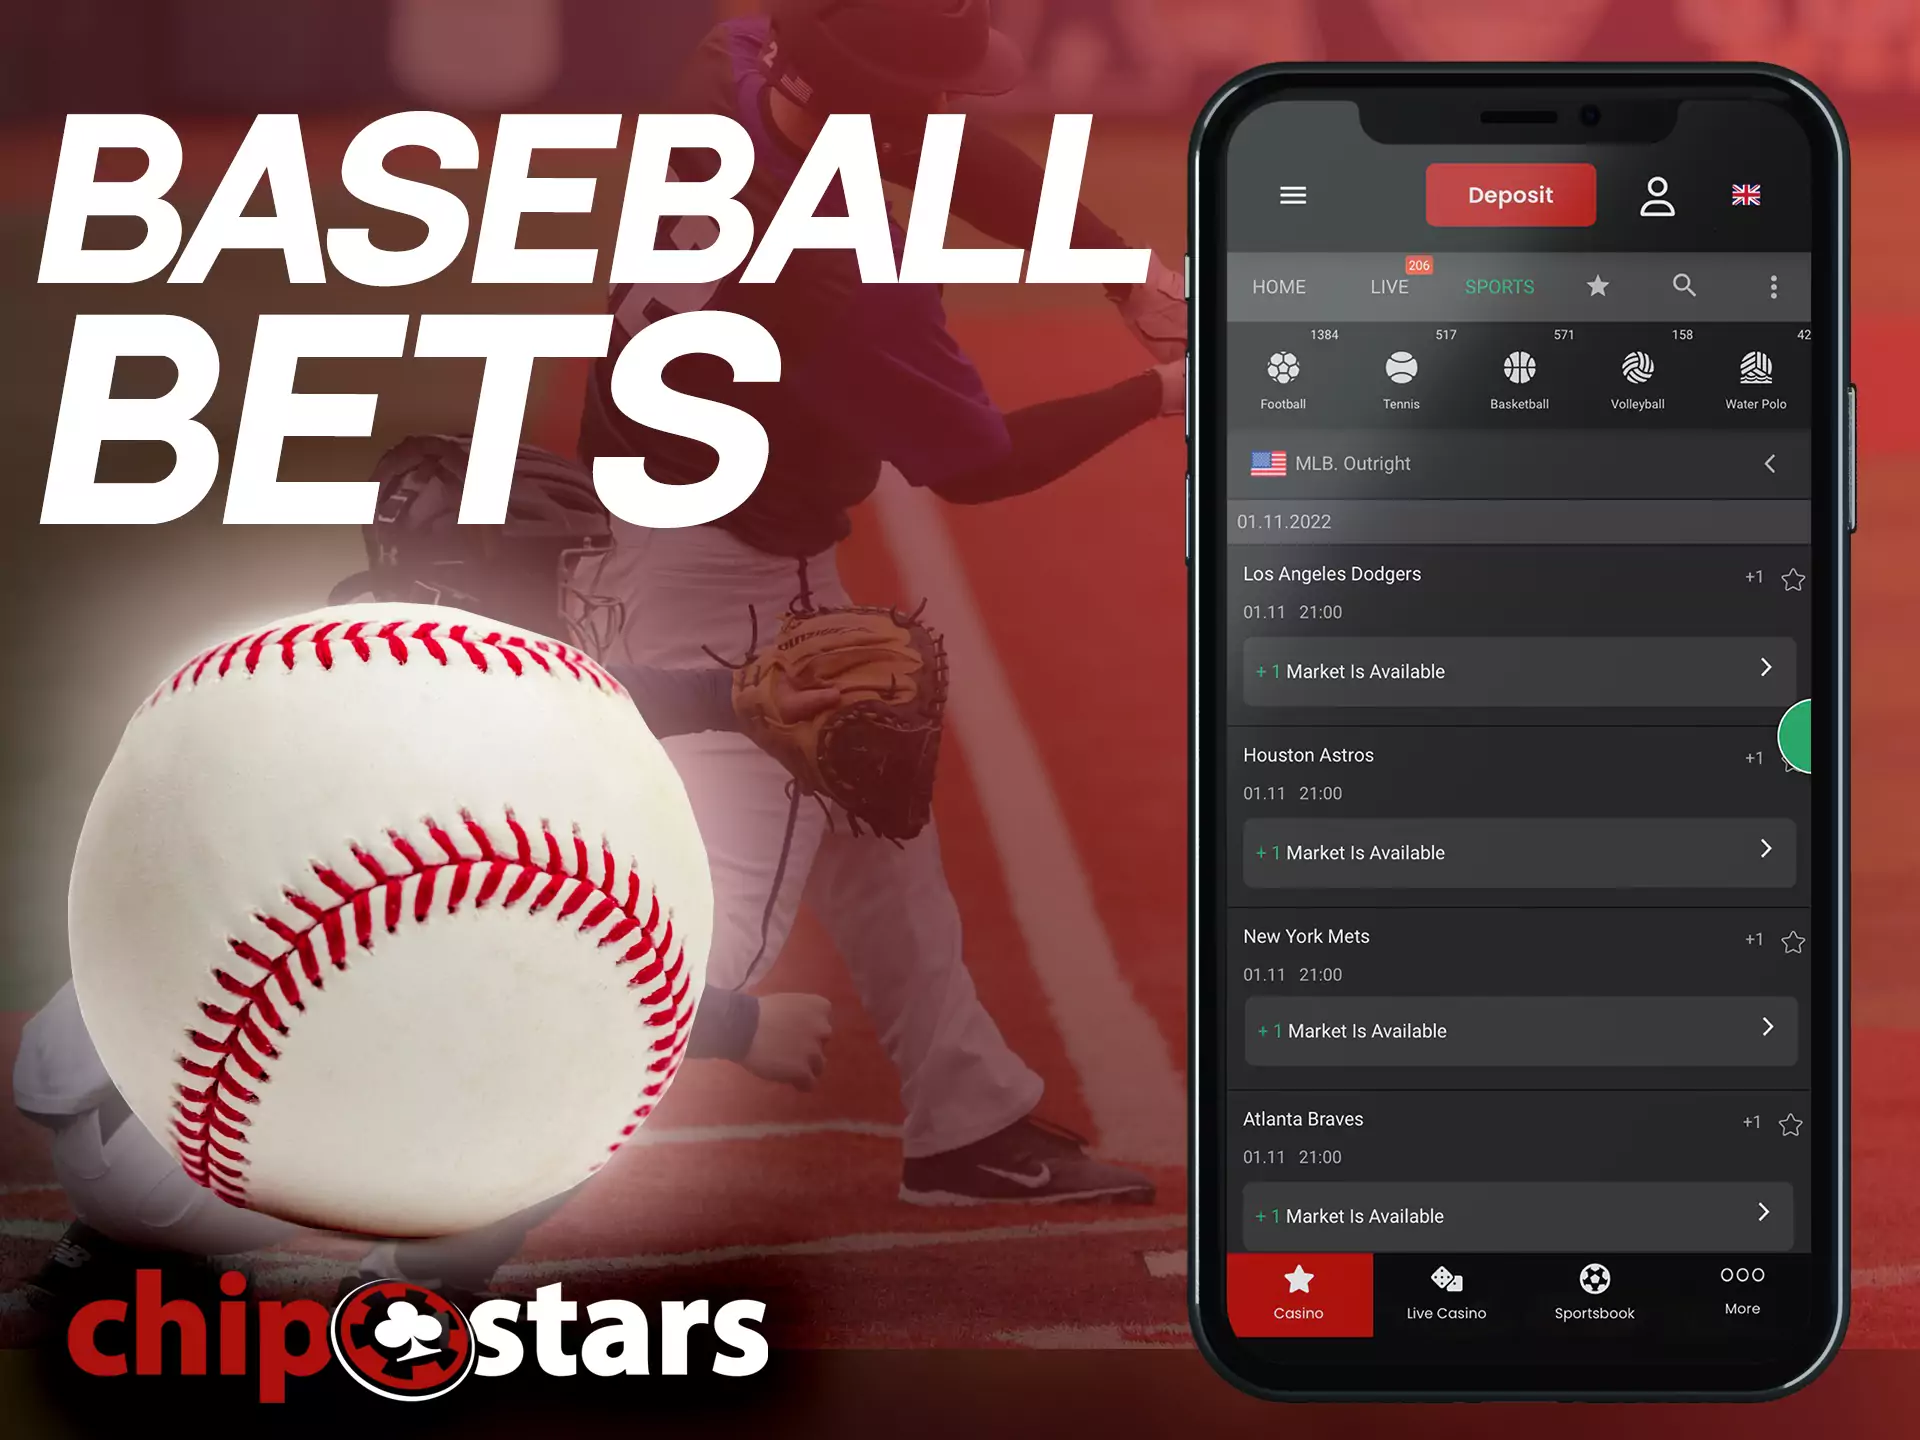 In the Chipstars sportsbook, you can place a bet on baseball.